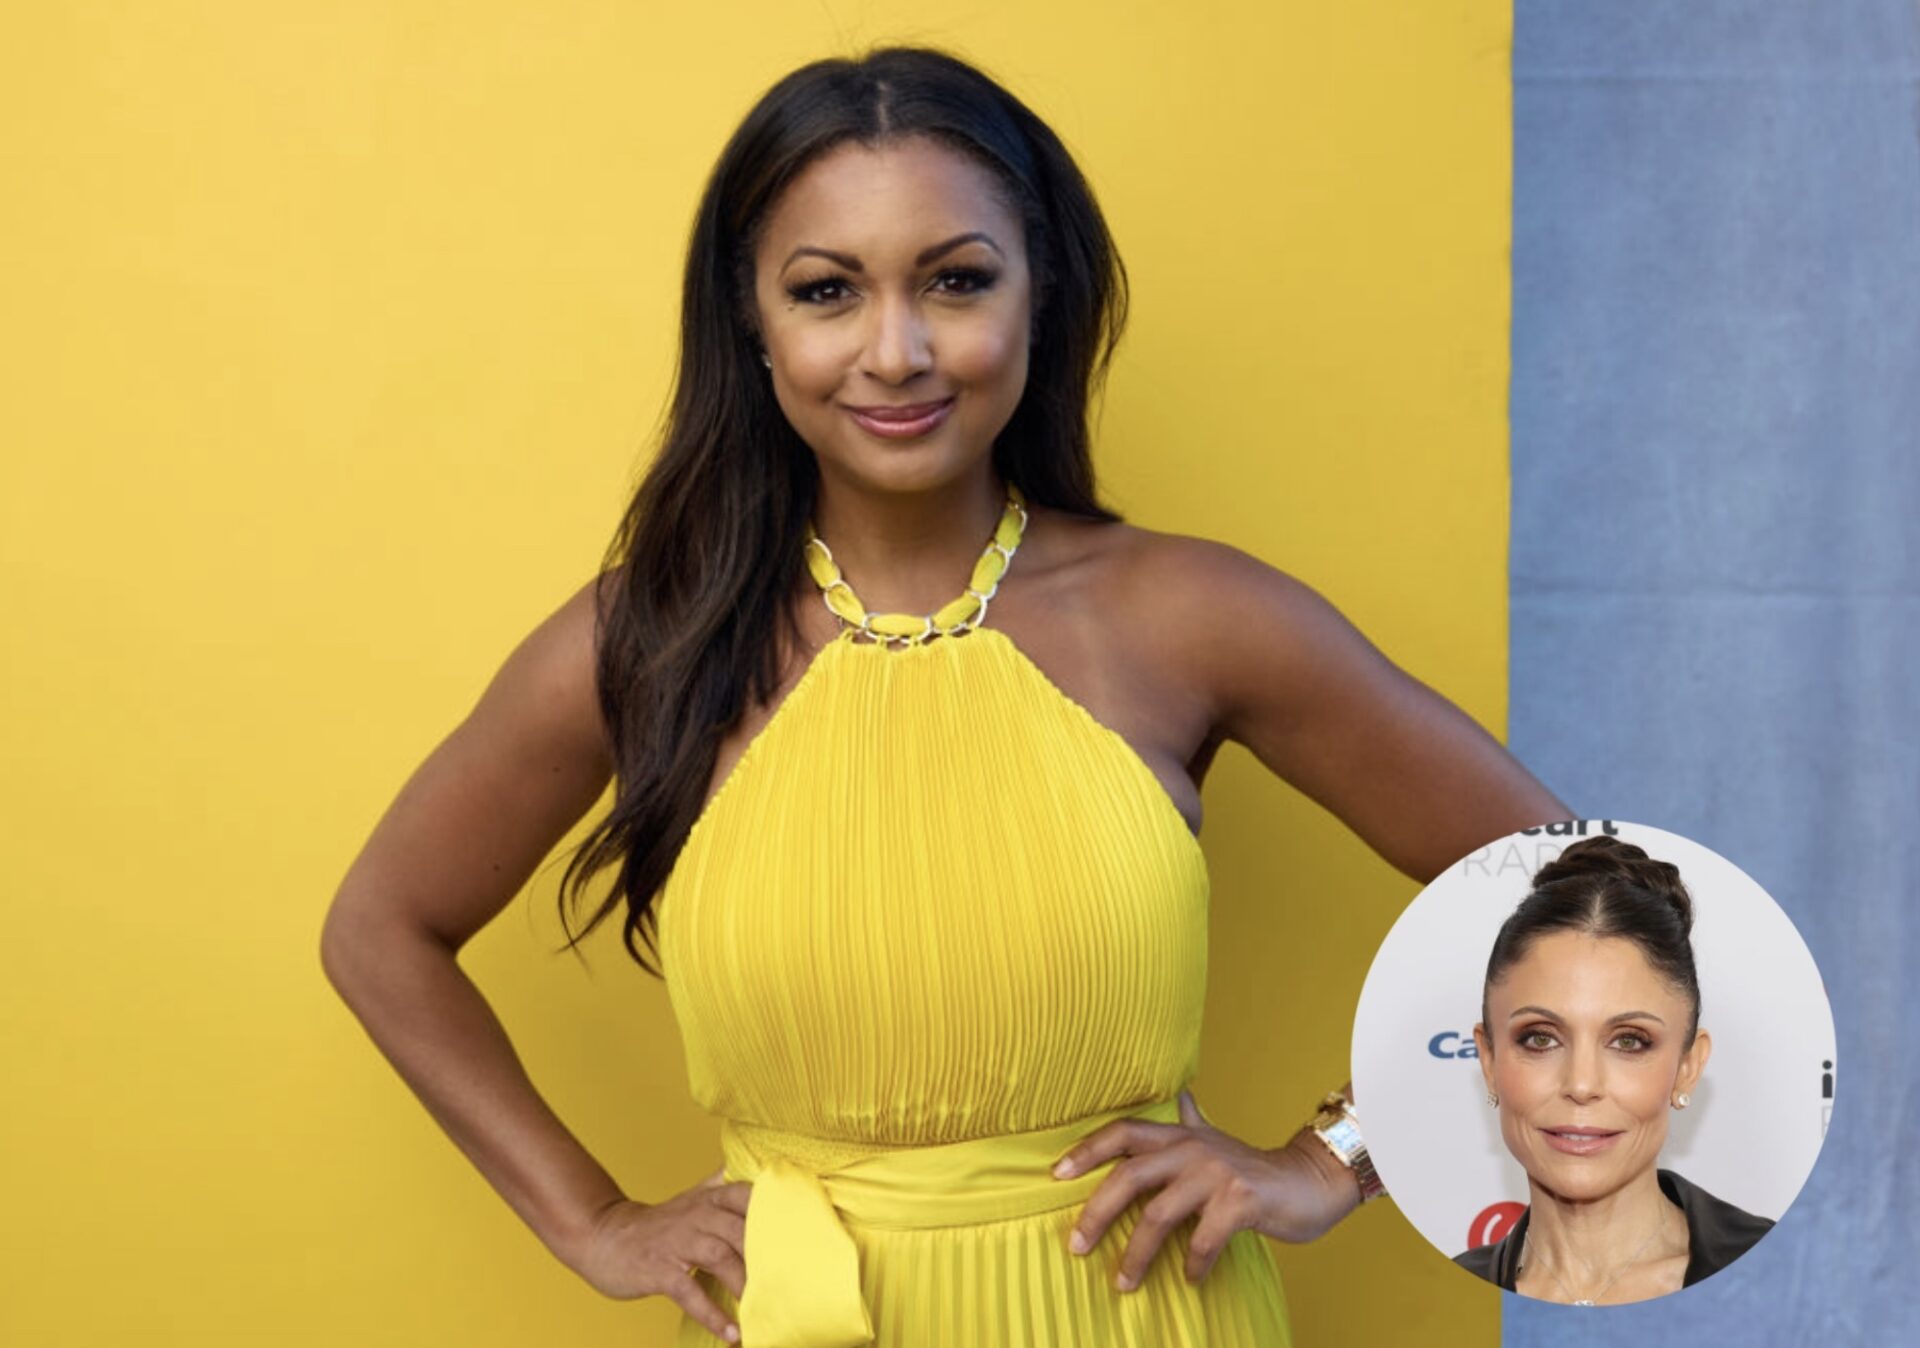 Hopping On The ‘Reality Reckoning’ Train Is A Big Nope For Real Housewife Eboni K. Williams